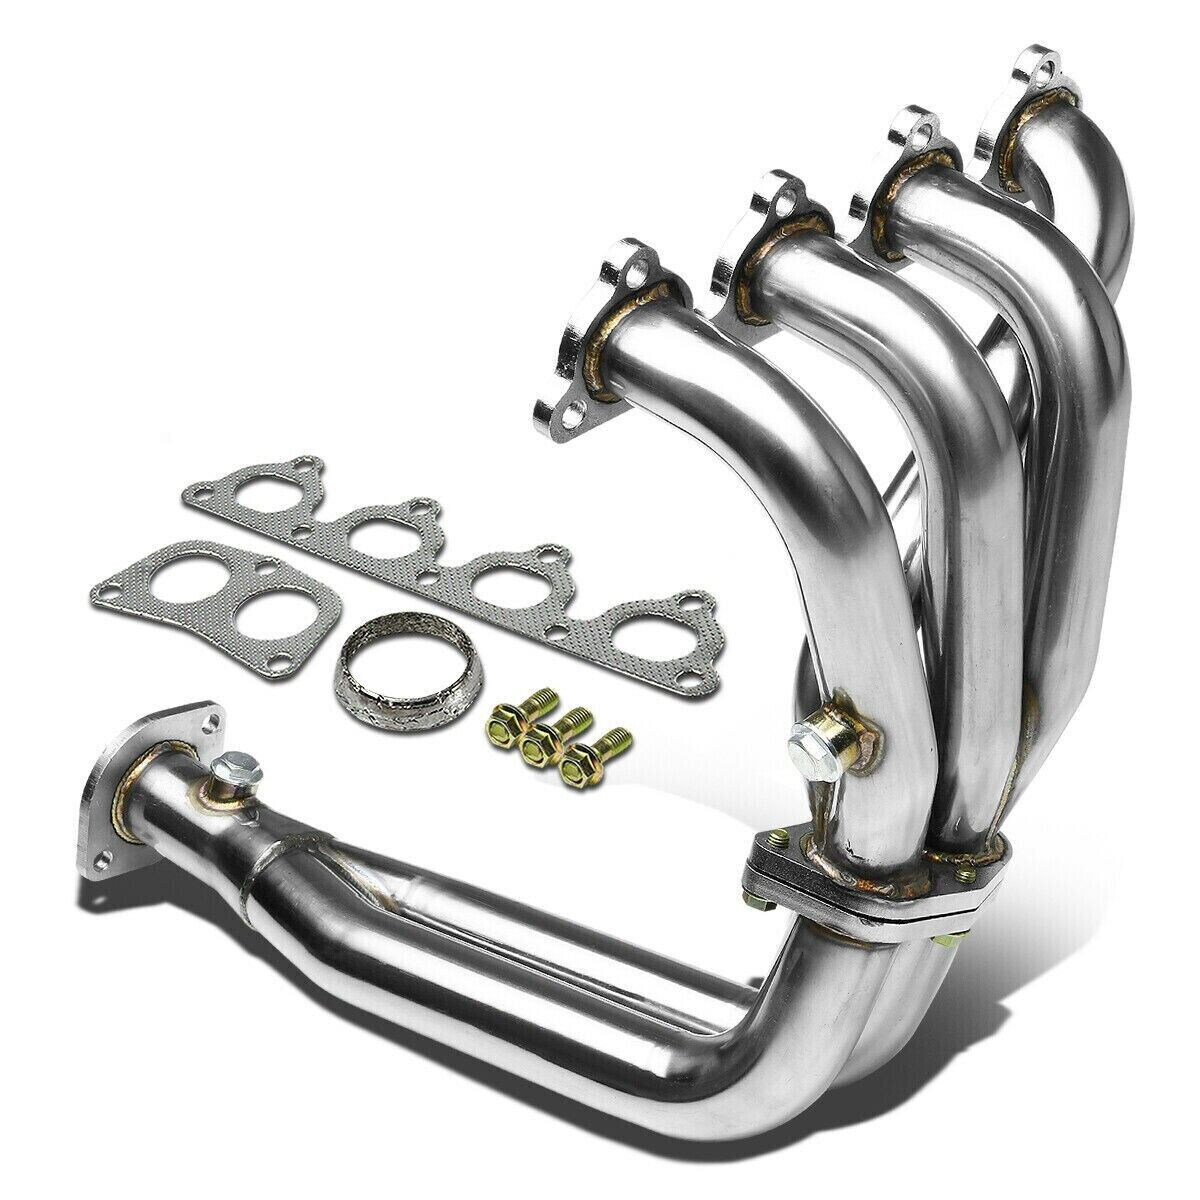 For 1988-00 Honda Civic Stainless Exhaust Manifold Header